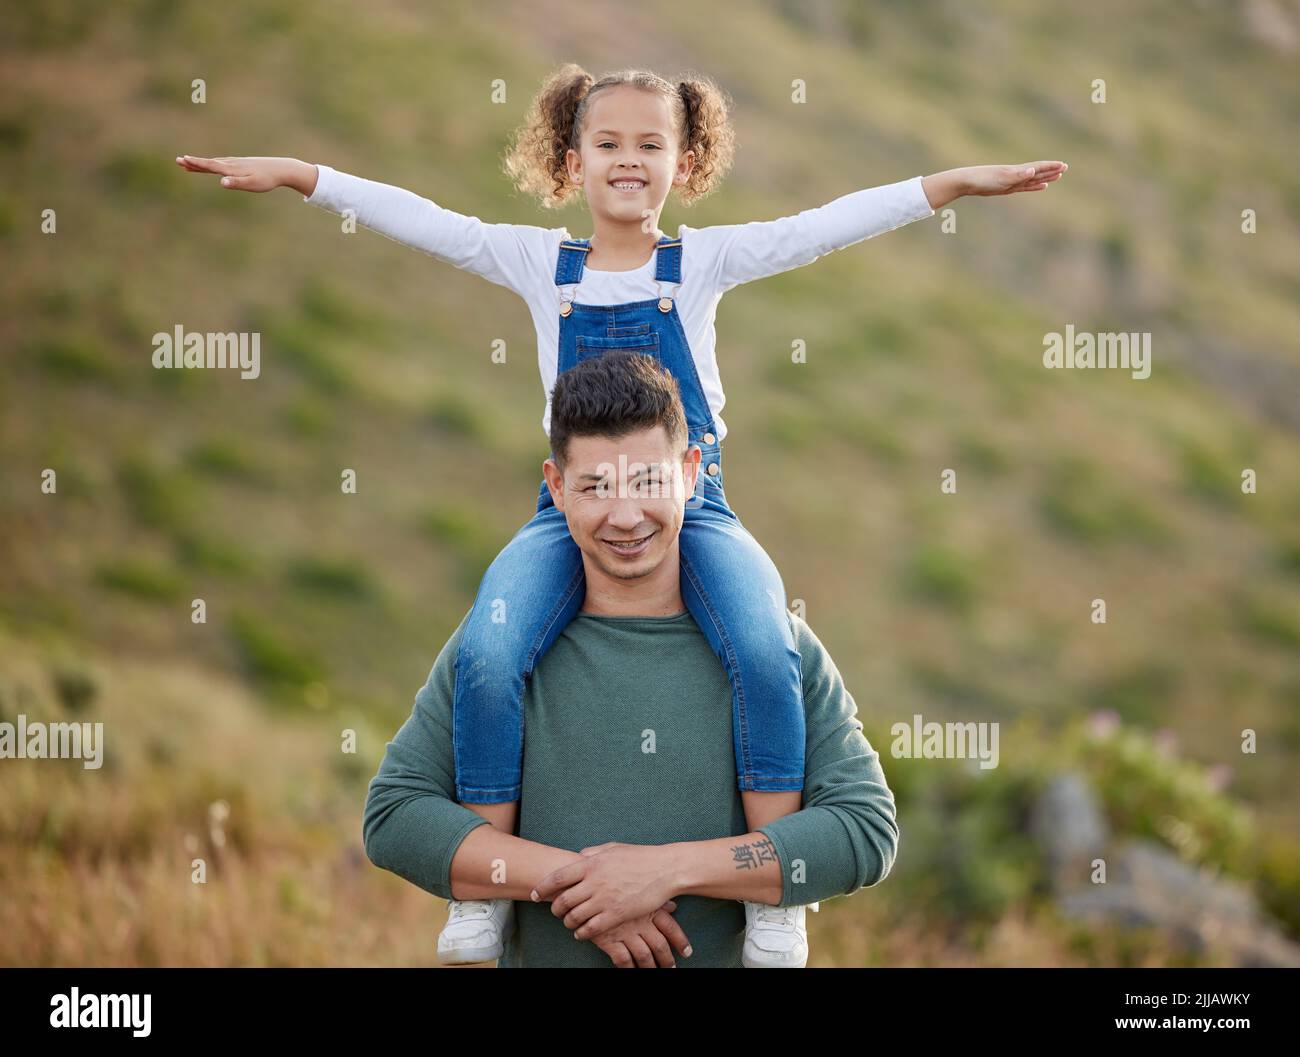 The day I became a father was the best day of my life. an adorable little girl spending the day outdoors with her father. Stock Photo